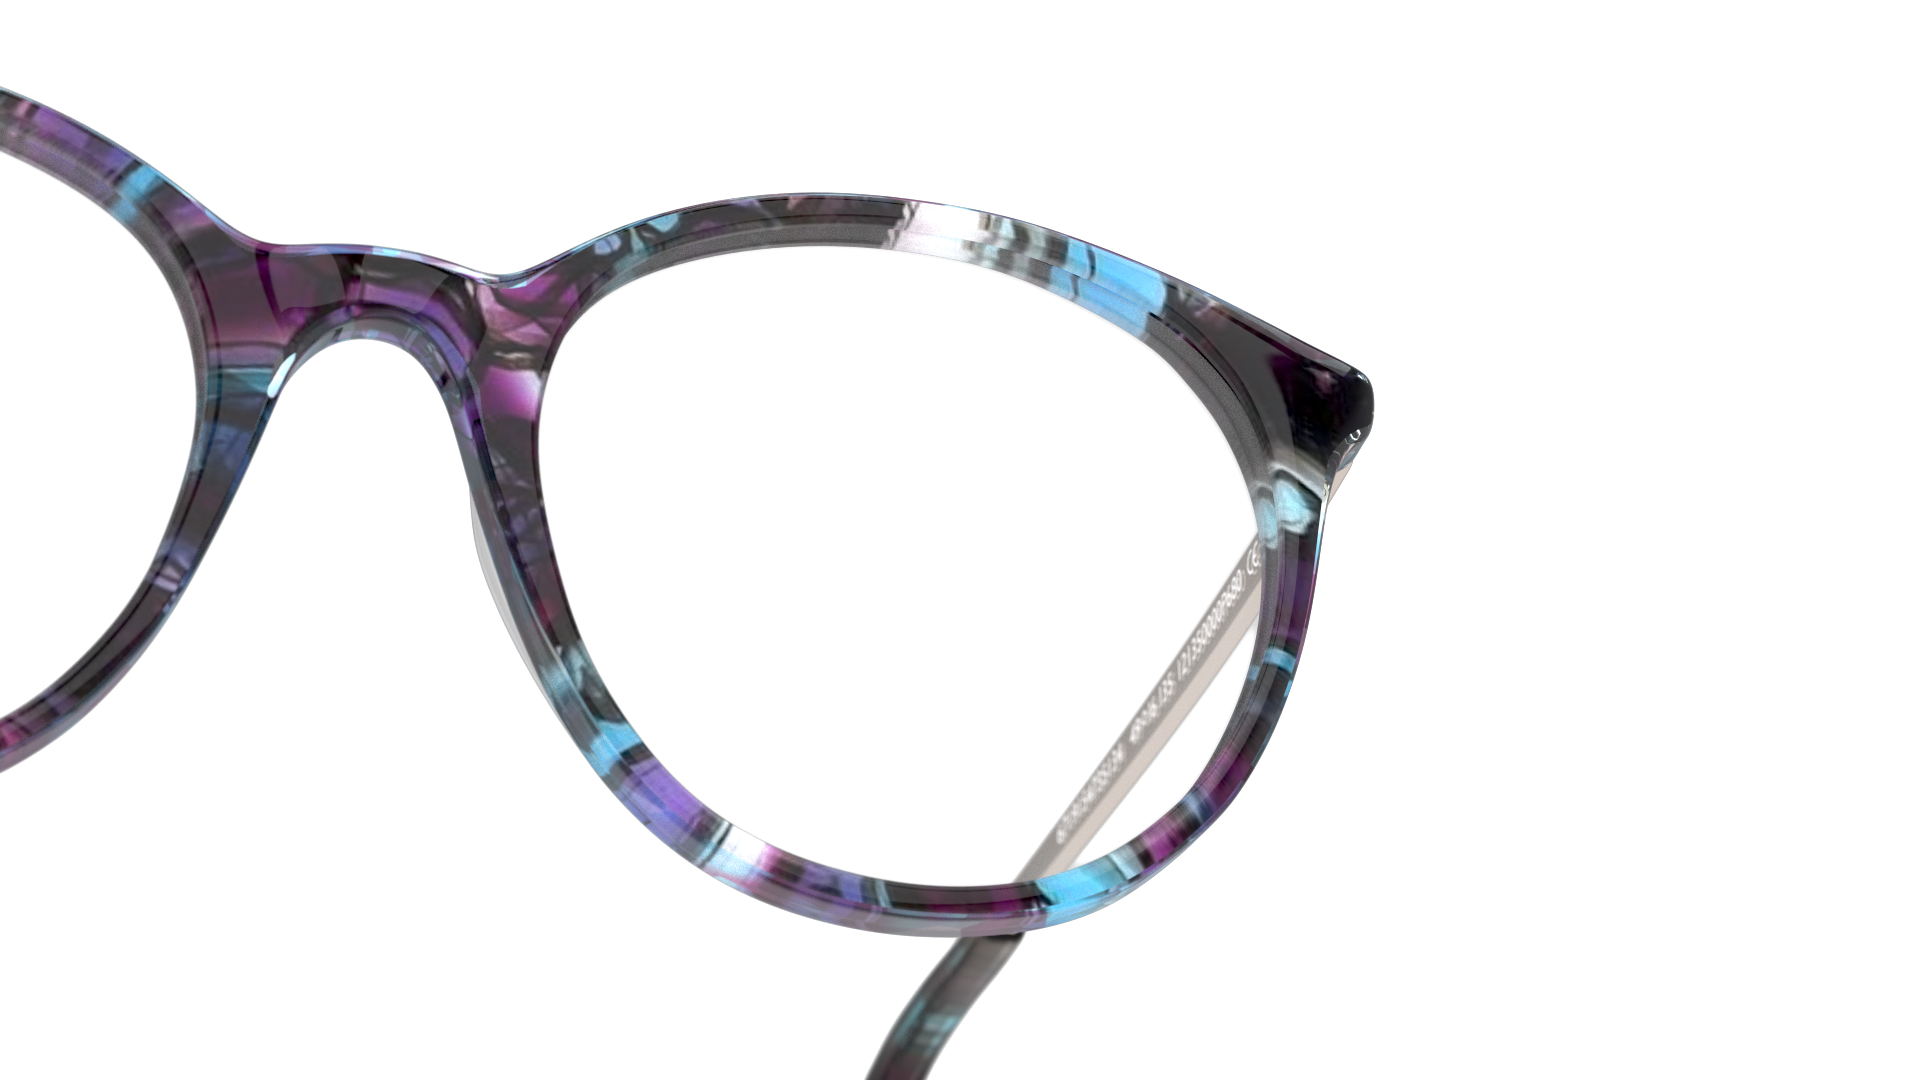 Detail01 Unofficial UNOF0030 (PS00) Glasses Transparent / Pink